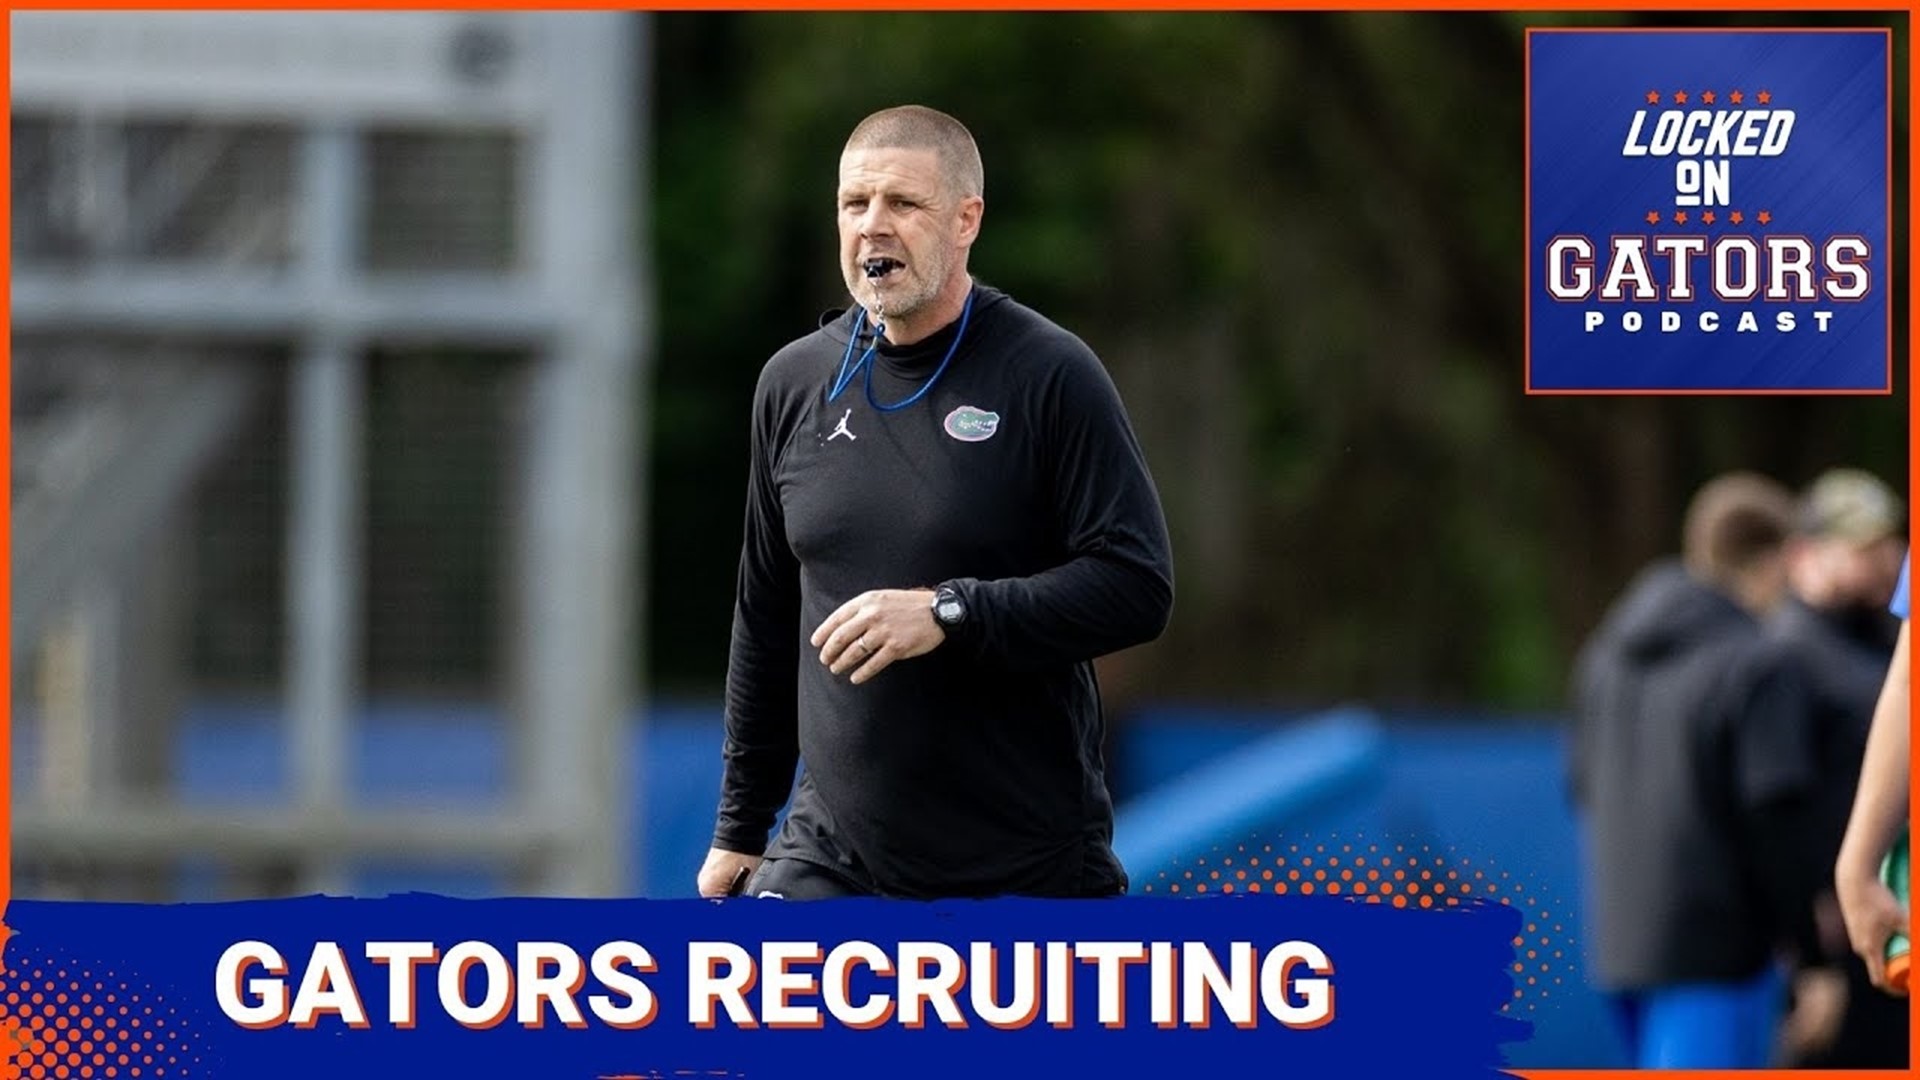 The Florida Gators and head coach Billy Napier have their quarterback secured for the 2024 recruiting cycle after earning a commitment a highly-touted recruit.